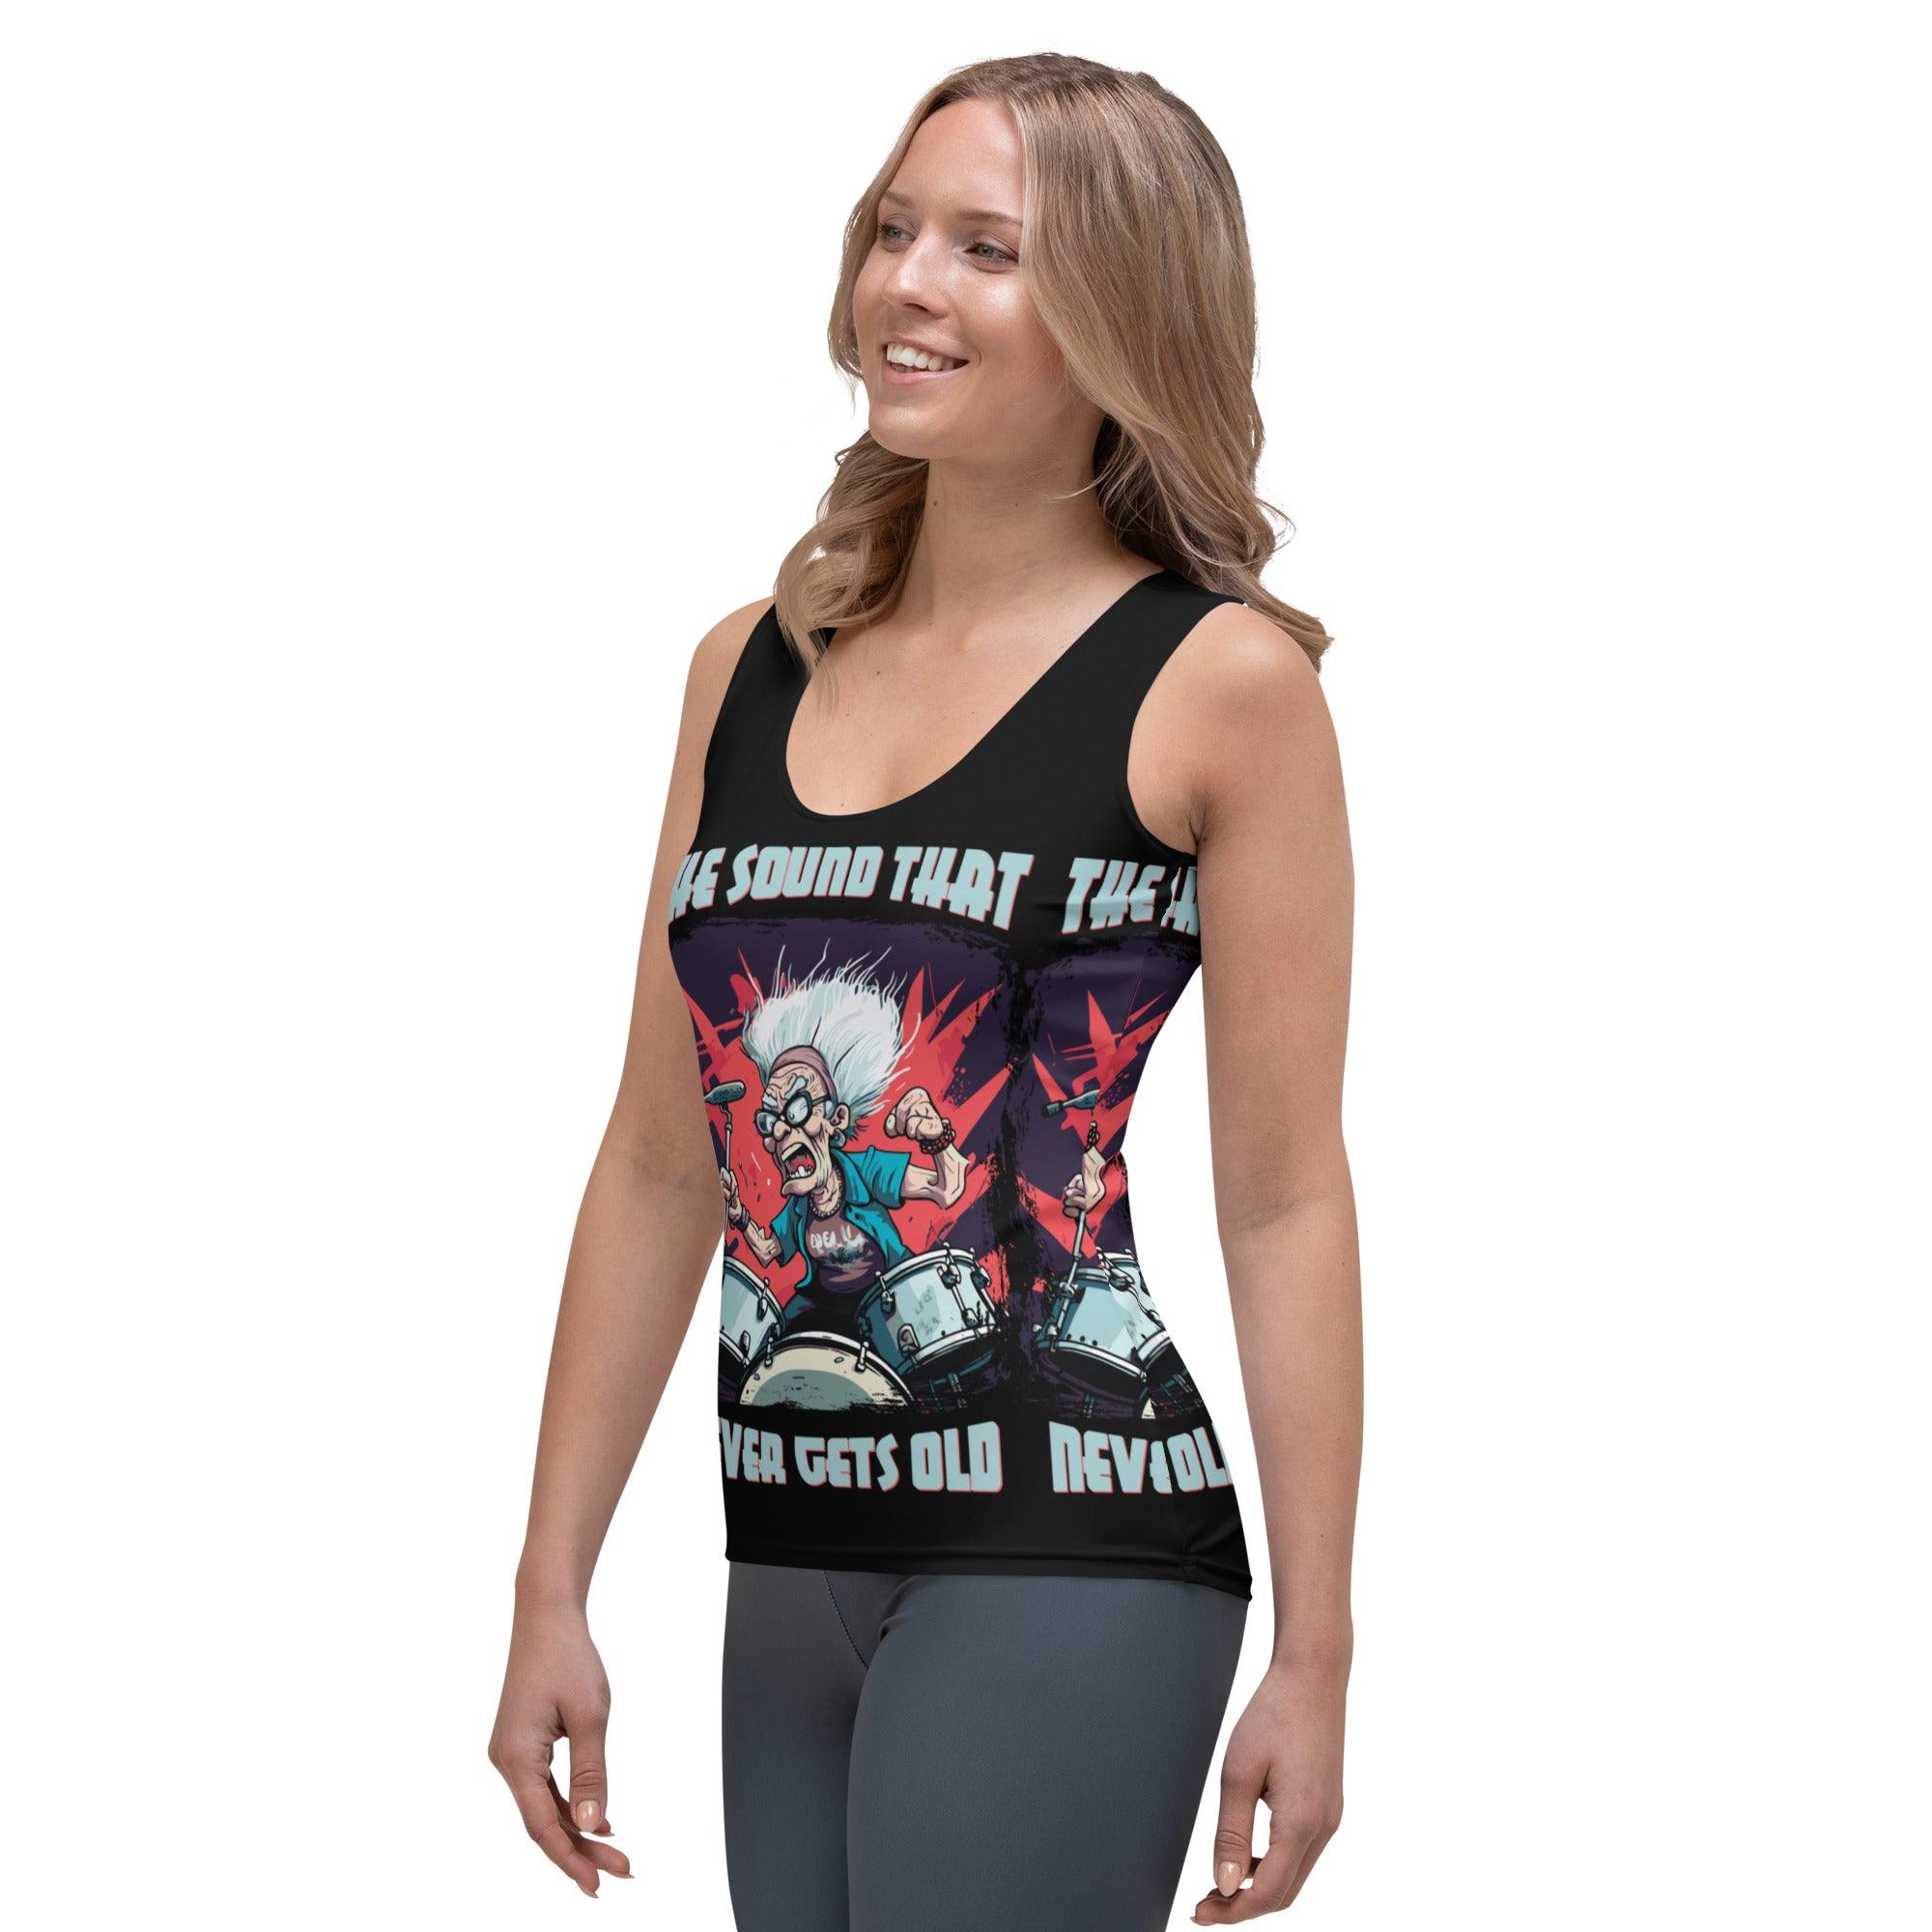 Sound Never Gets Old Sublimation Cut & Sew Tank Top - Beyond T-shirts